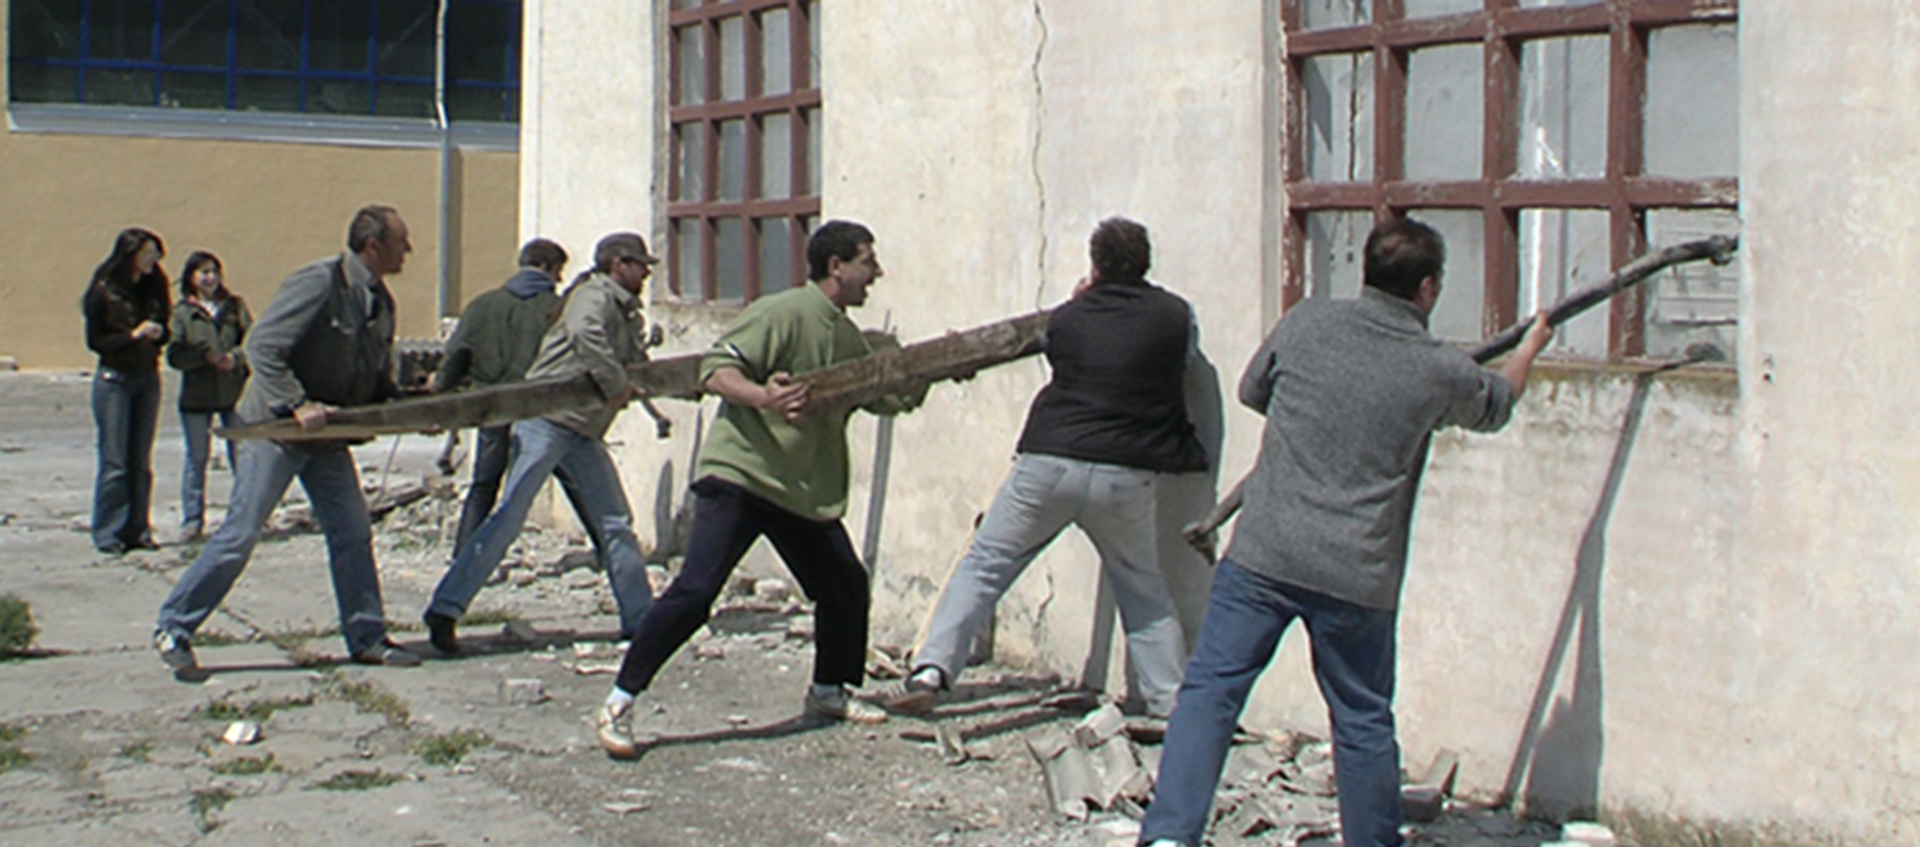 A row of men use logs and other objects to knock down the wall of a decaying building.